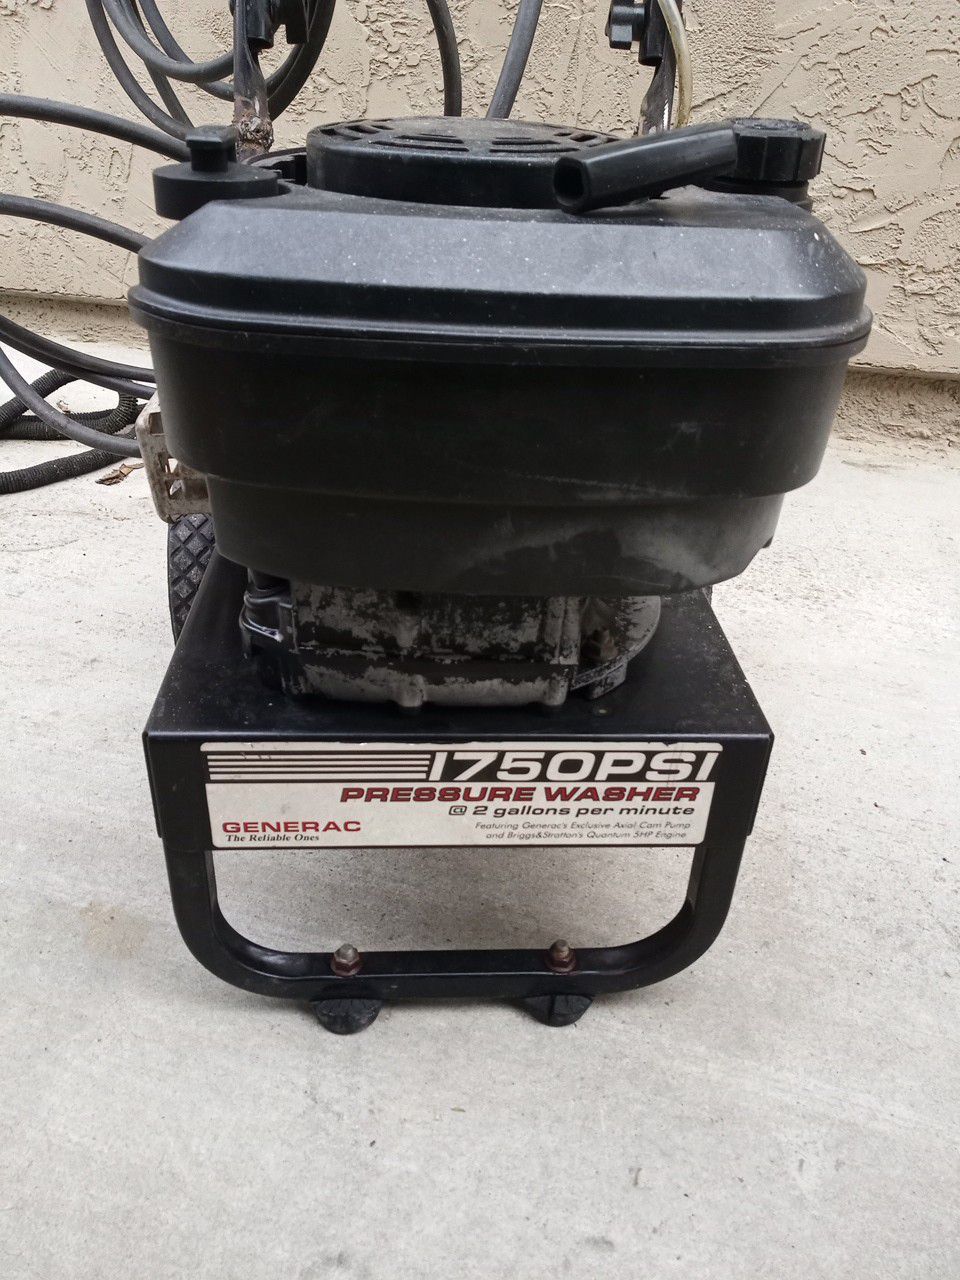 Scold generic 1750 psi pressure washer needs a nozzle comes with hose used runs great works great